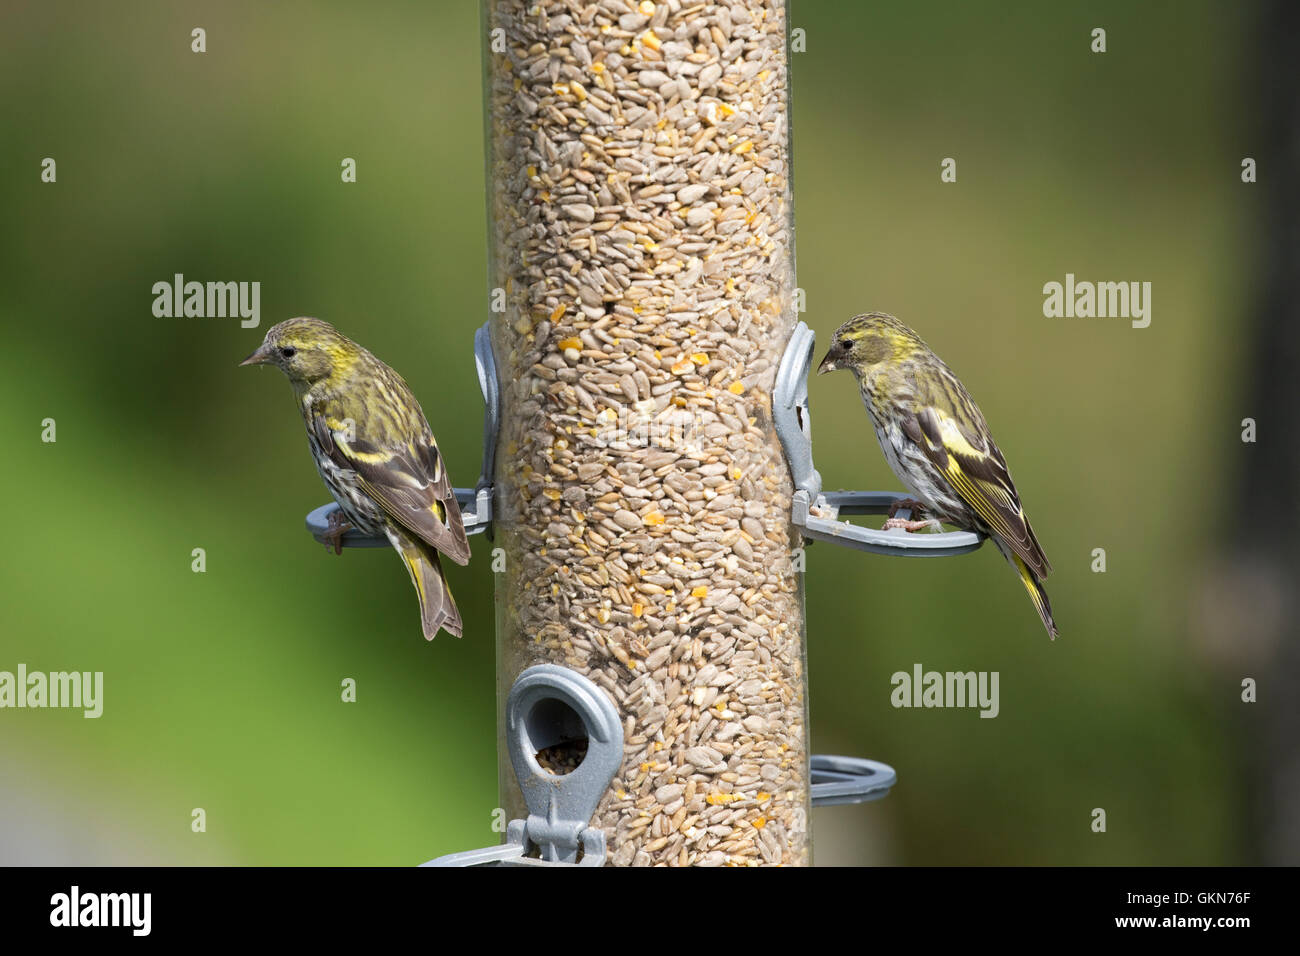 Siskins on large bird feeder Bwlch Nant Yr Arian Visitor Centre Ceredigion Mid Wales Stock Photo